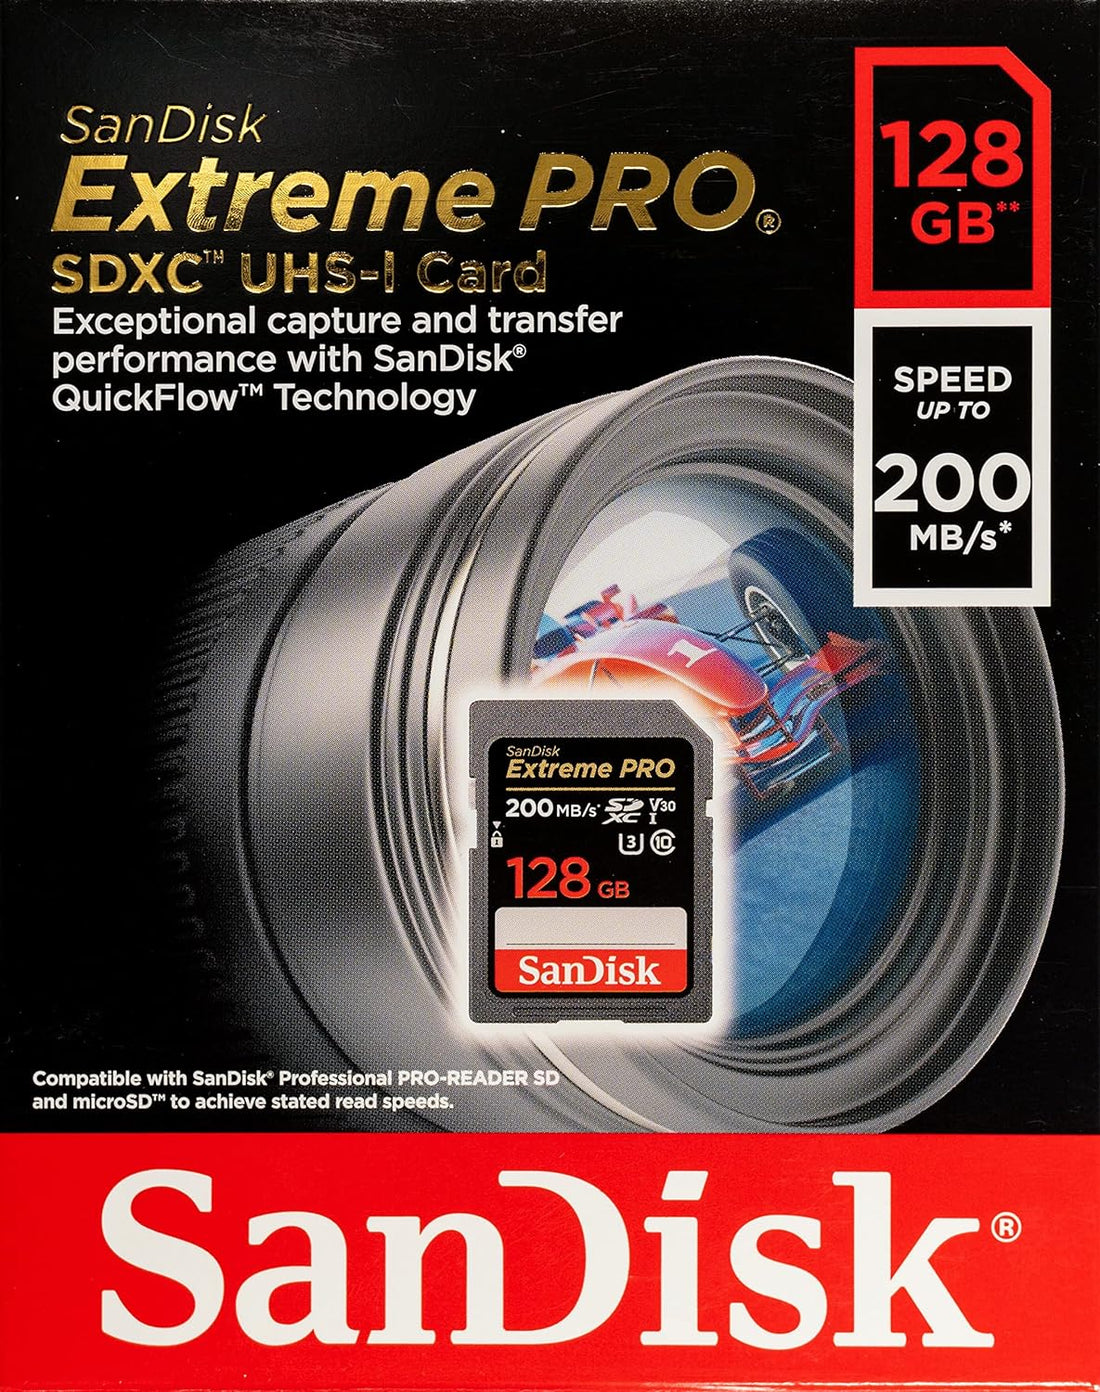 SanDisk 128GB Extreme Pro Memory Card Works with Nikon D3400, D3300, D750, D5500, D5300, D500, AW130, W100, L840, A900 Digital Camera Bundle with 1 Everything But Stromboli 3.0 Micro & SD Card Reader